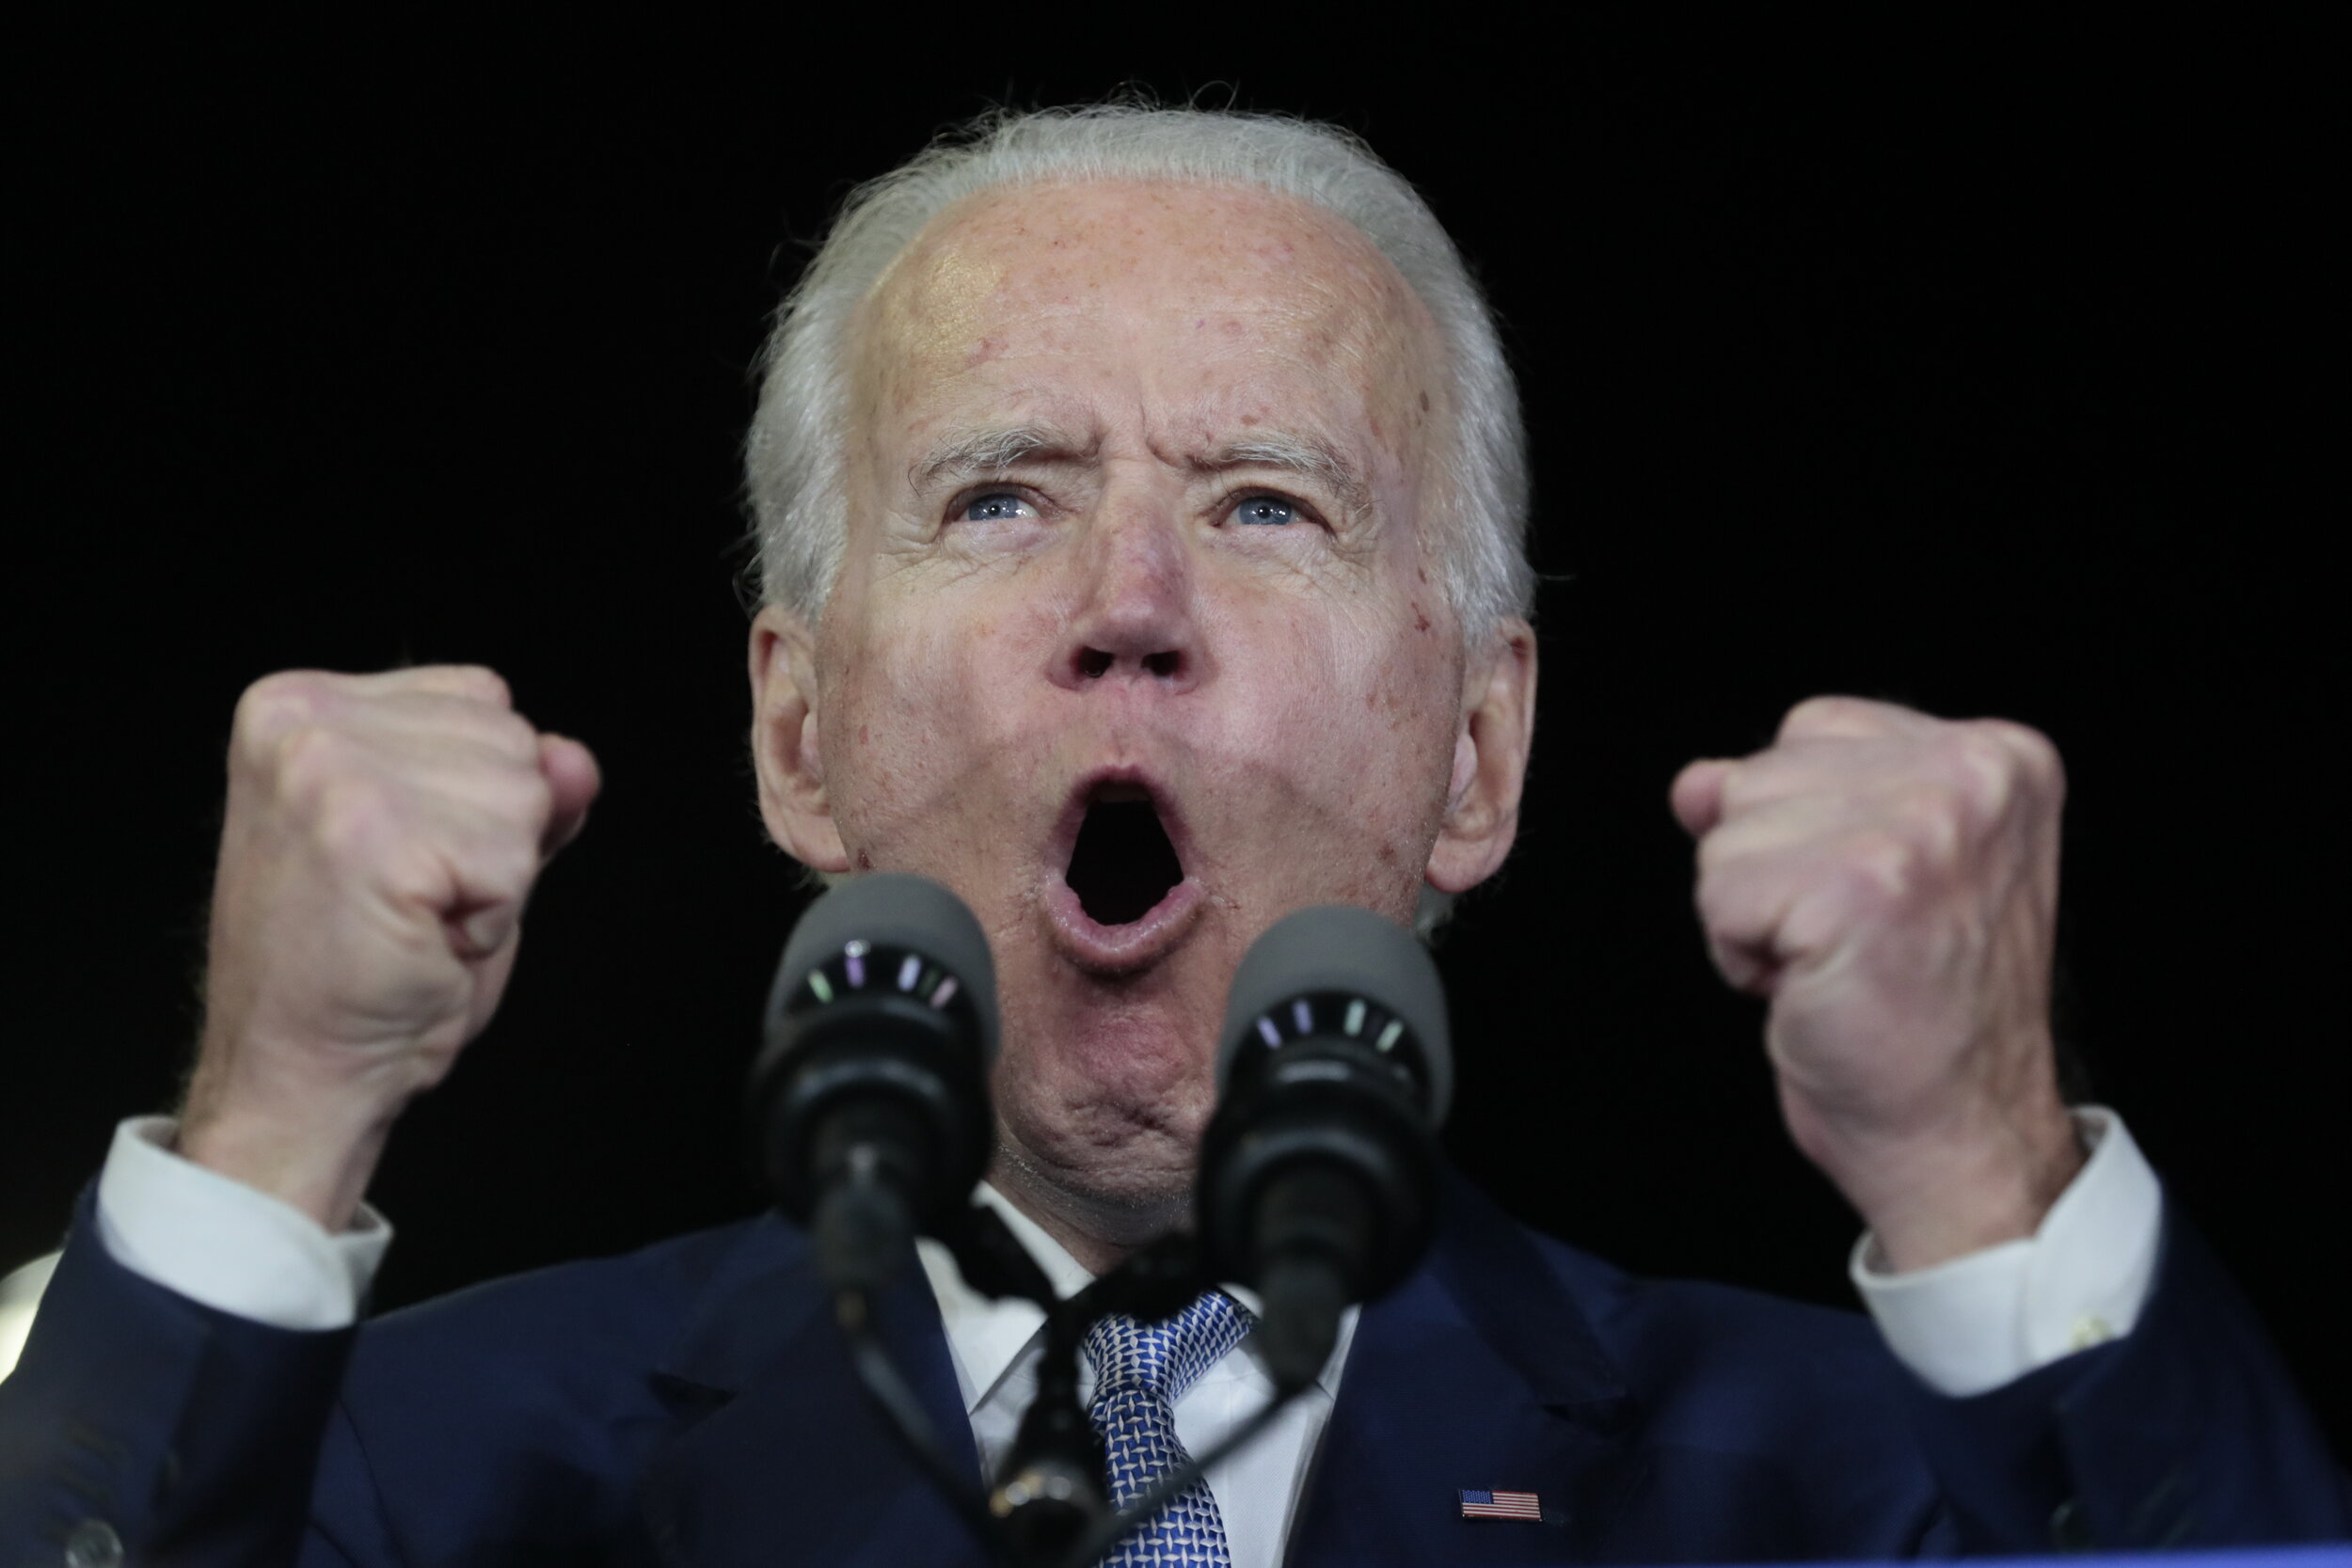  LOS ANGELES, CA, TUESDAY, MARCH 3, 2020 - Democratic Presidential hopeful, Joe Biden reacts to Super Tuesday voting results showing he won 10 states, catapulting him to the Democratic Party nominee for President at the Baldwin Hills Recreation Cente